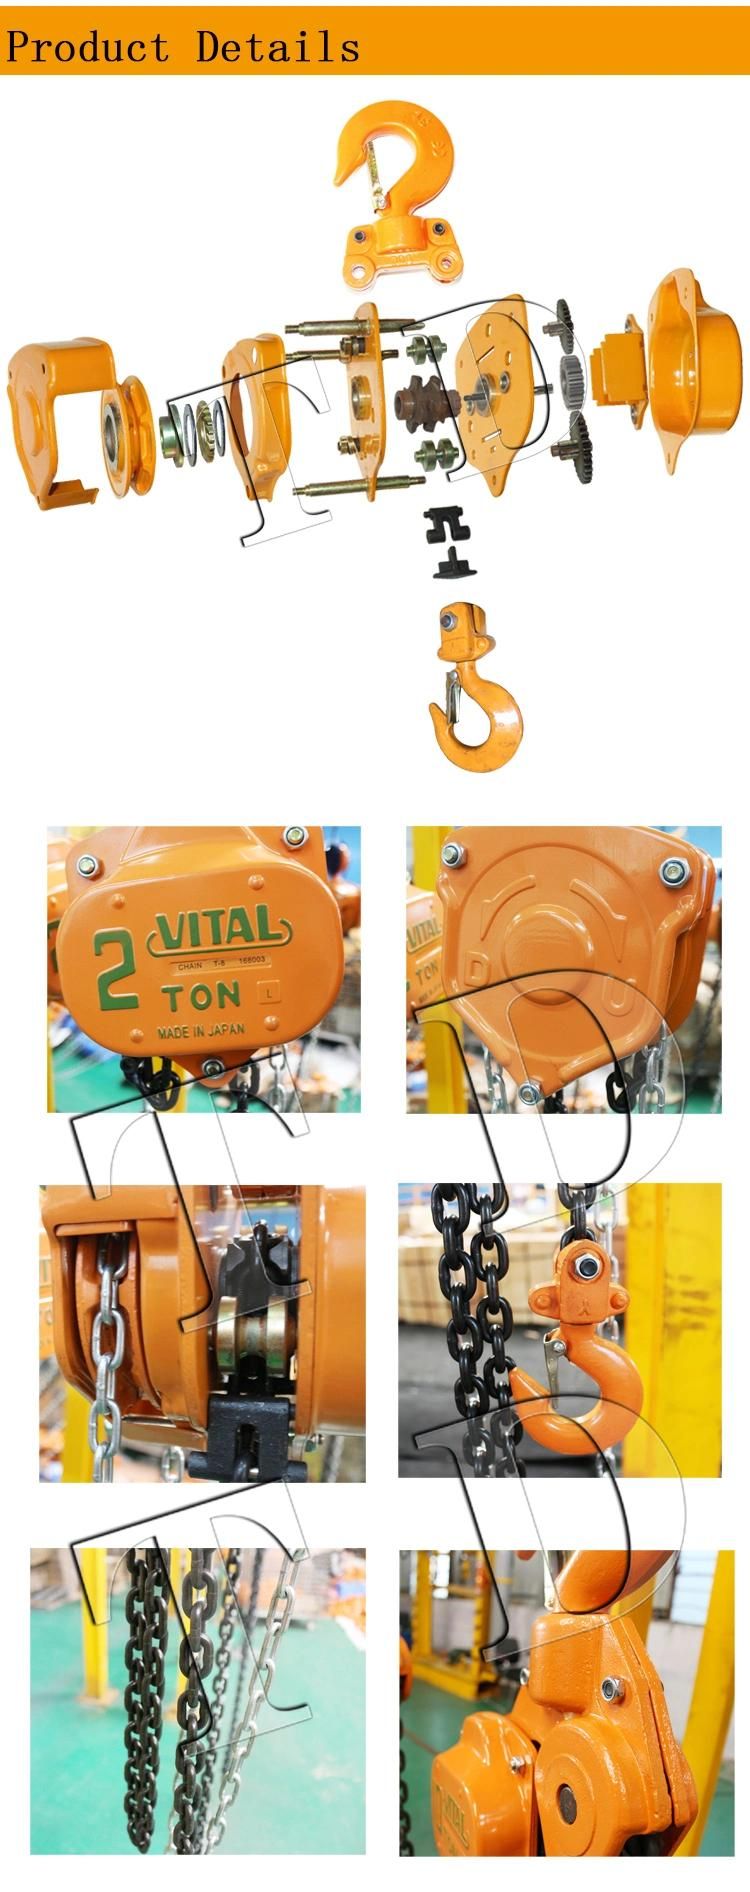 High Quality Vt Type Manual Chain Pulley Block Chain Hoist From 1ton to 10ton